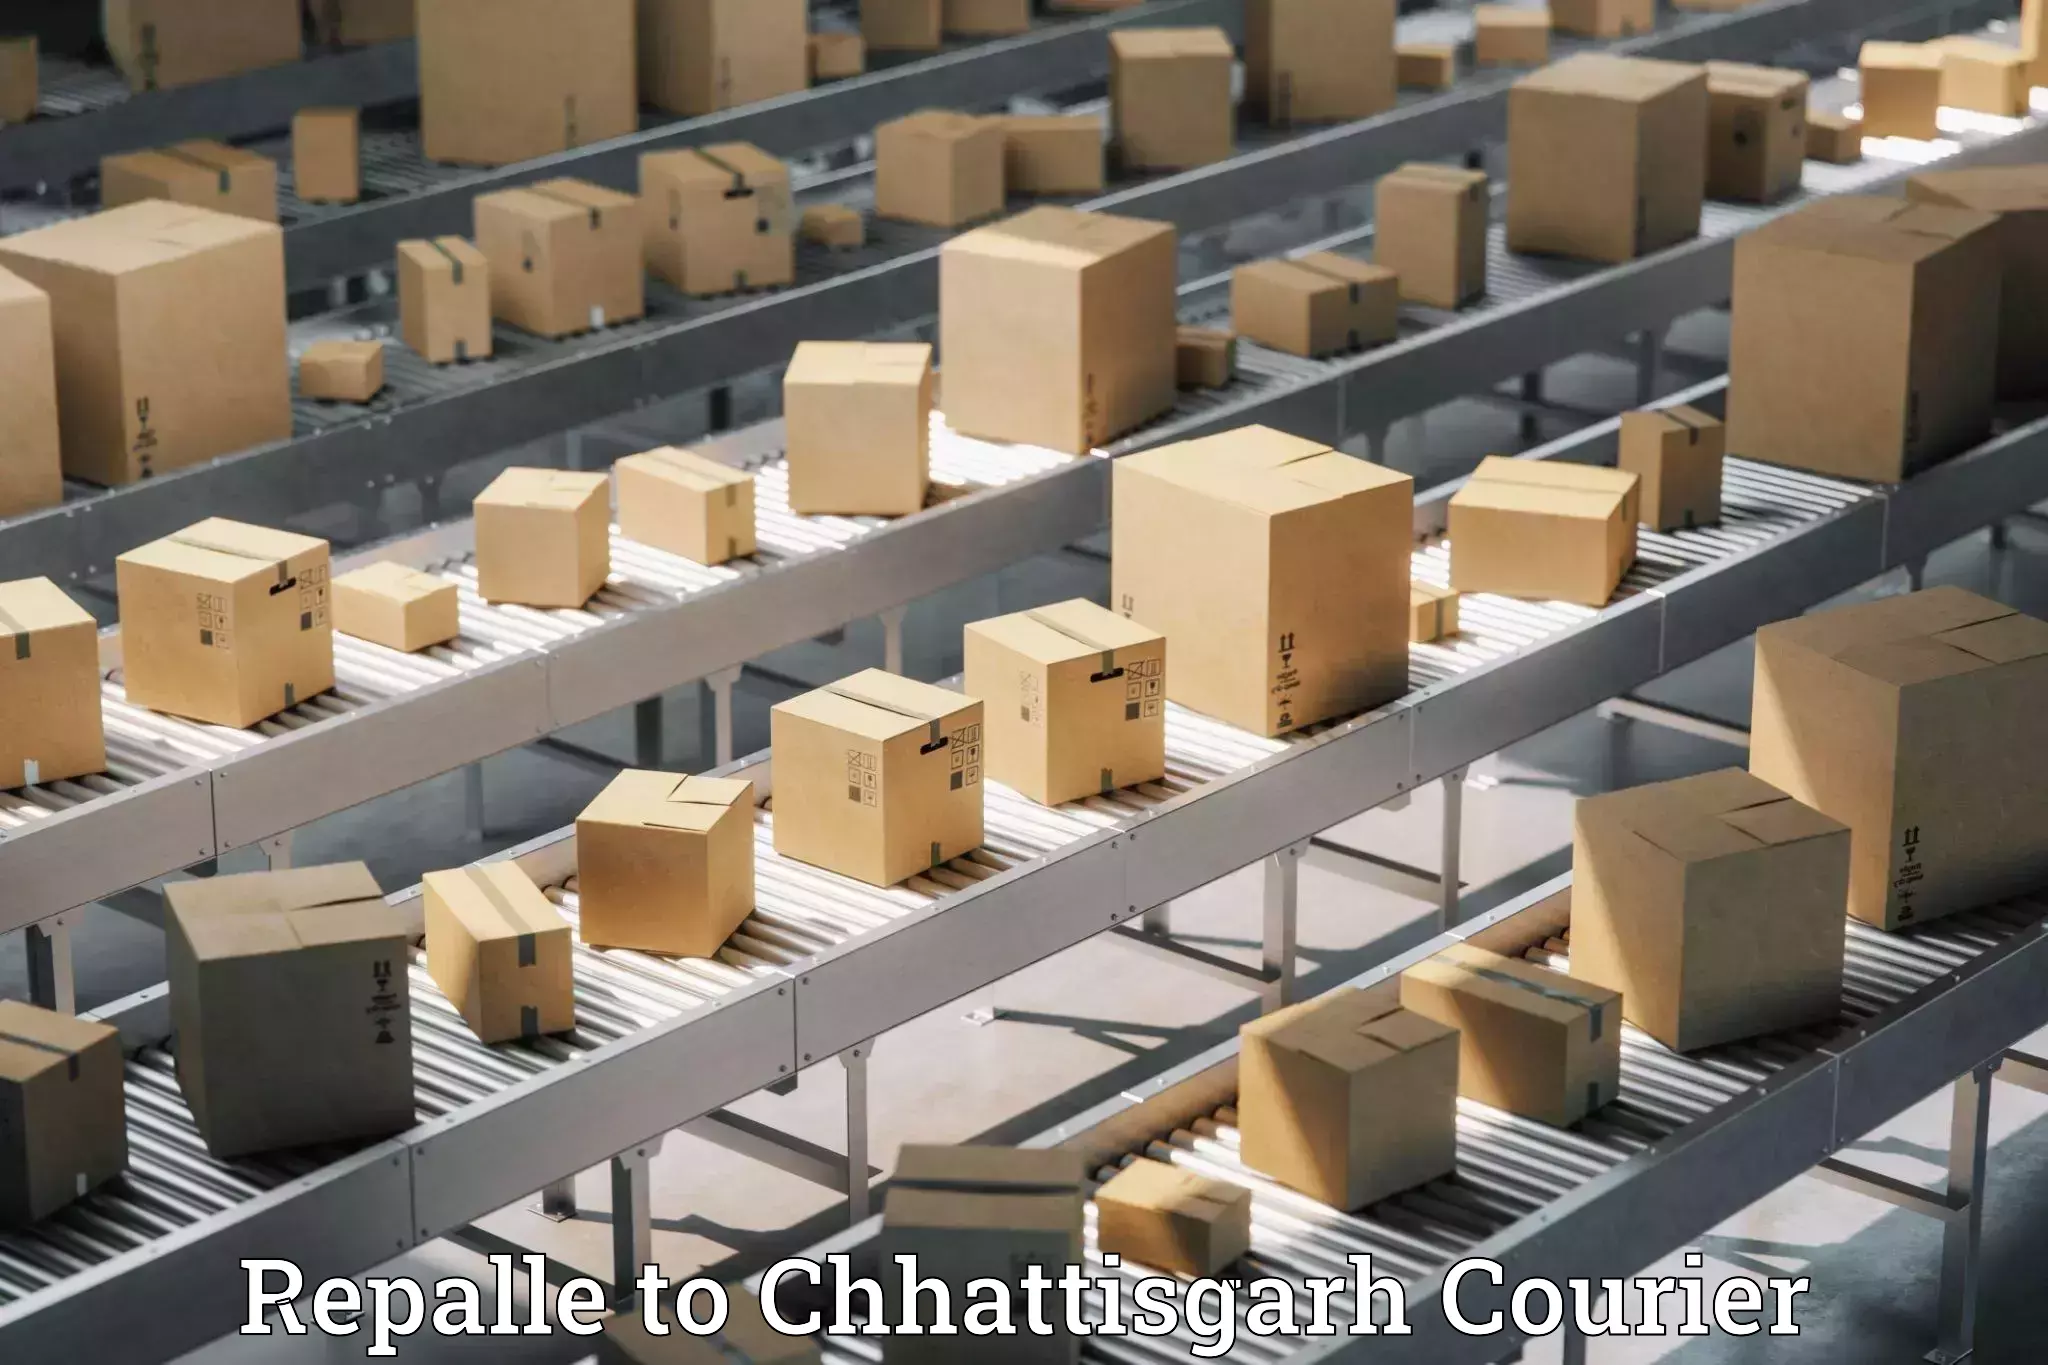 Luggage delivery solutions Repalle to Chhattisgarh